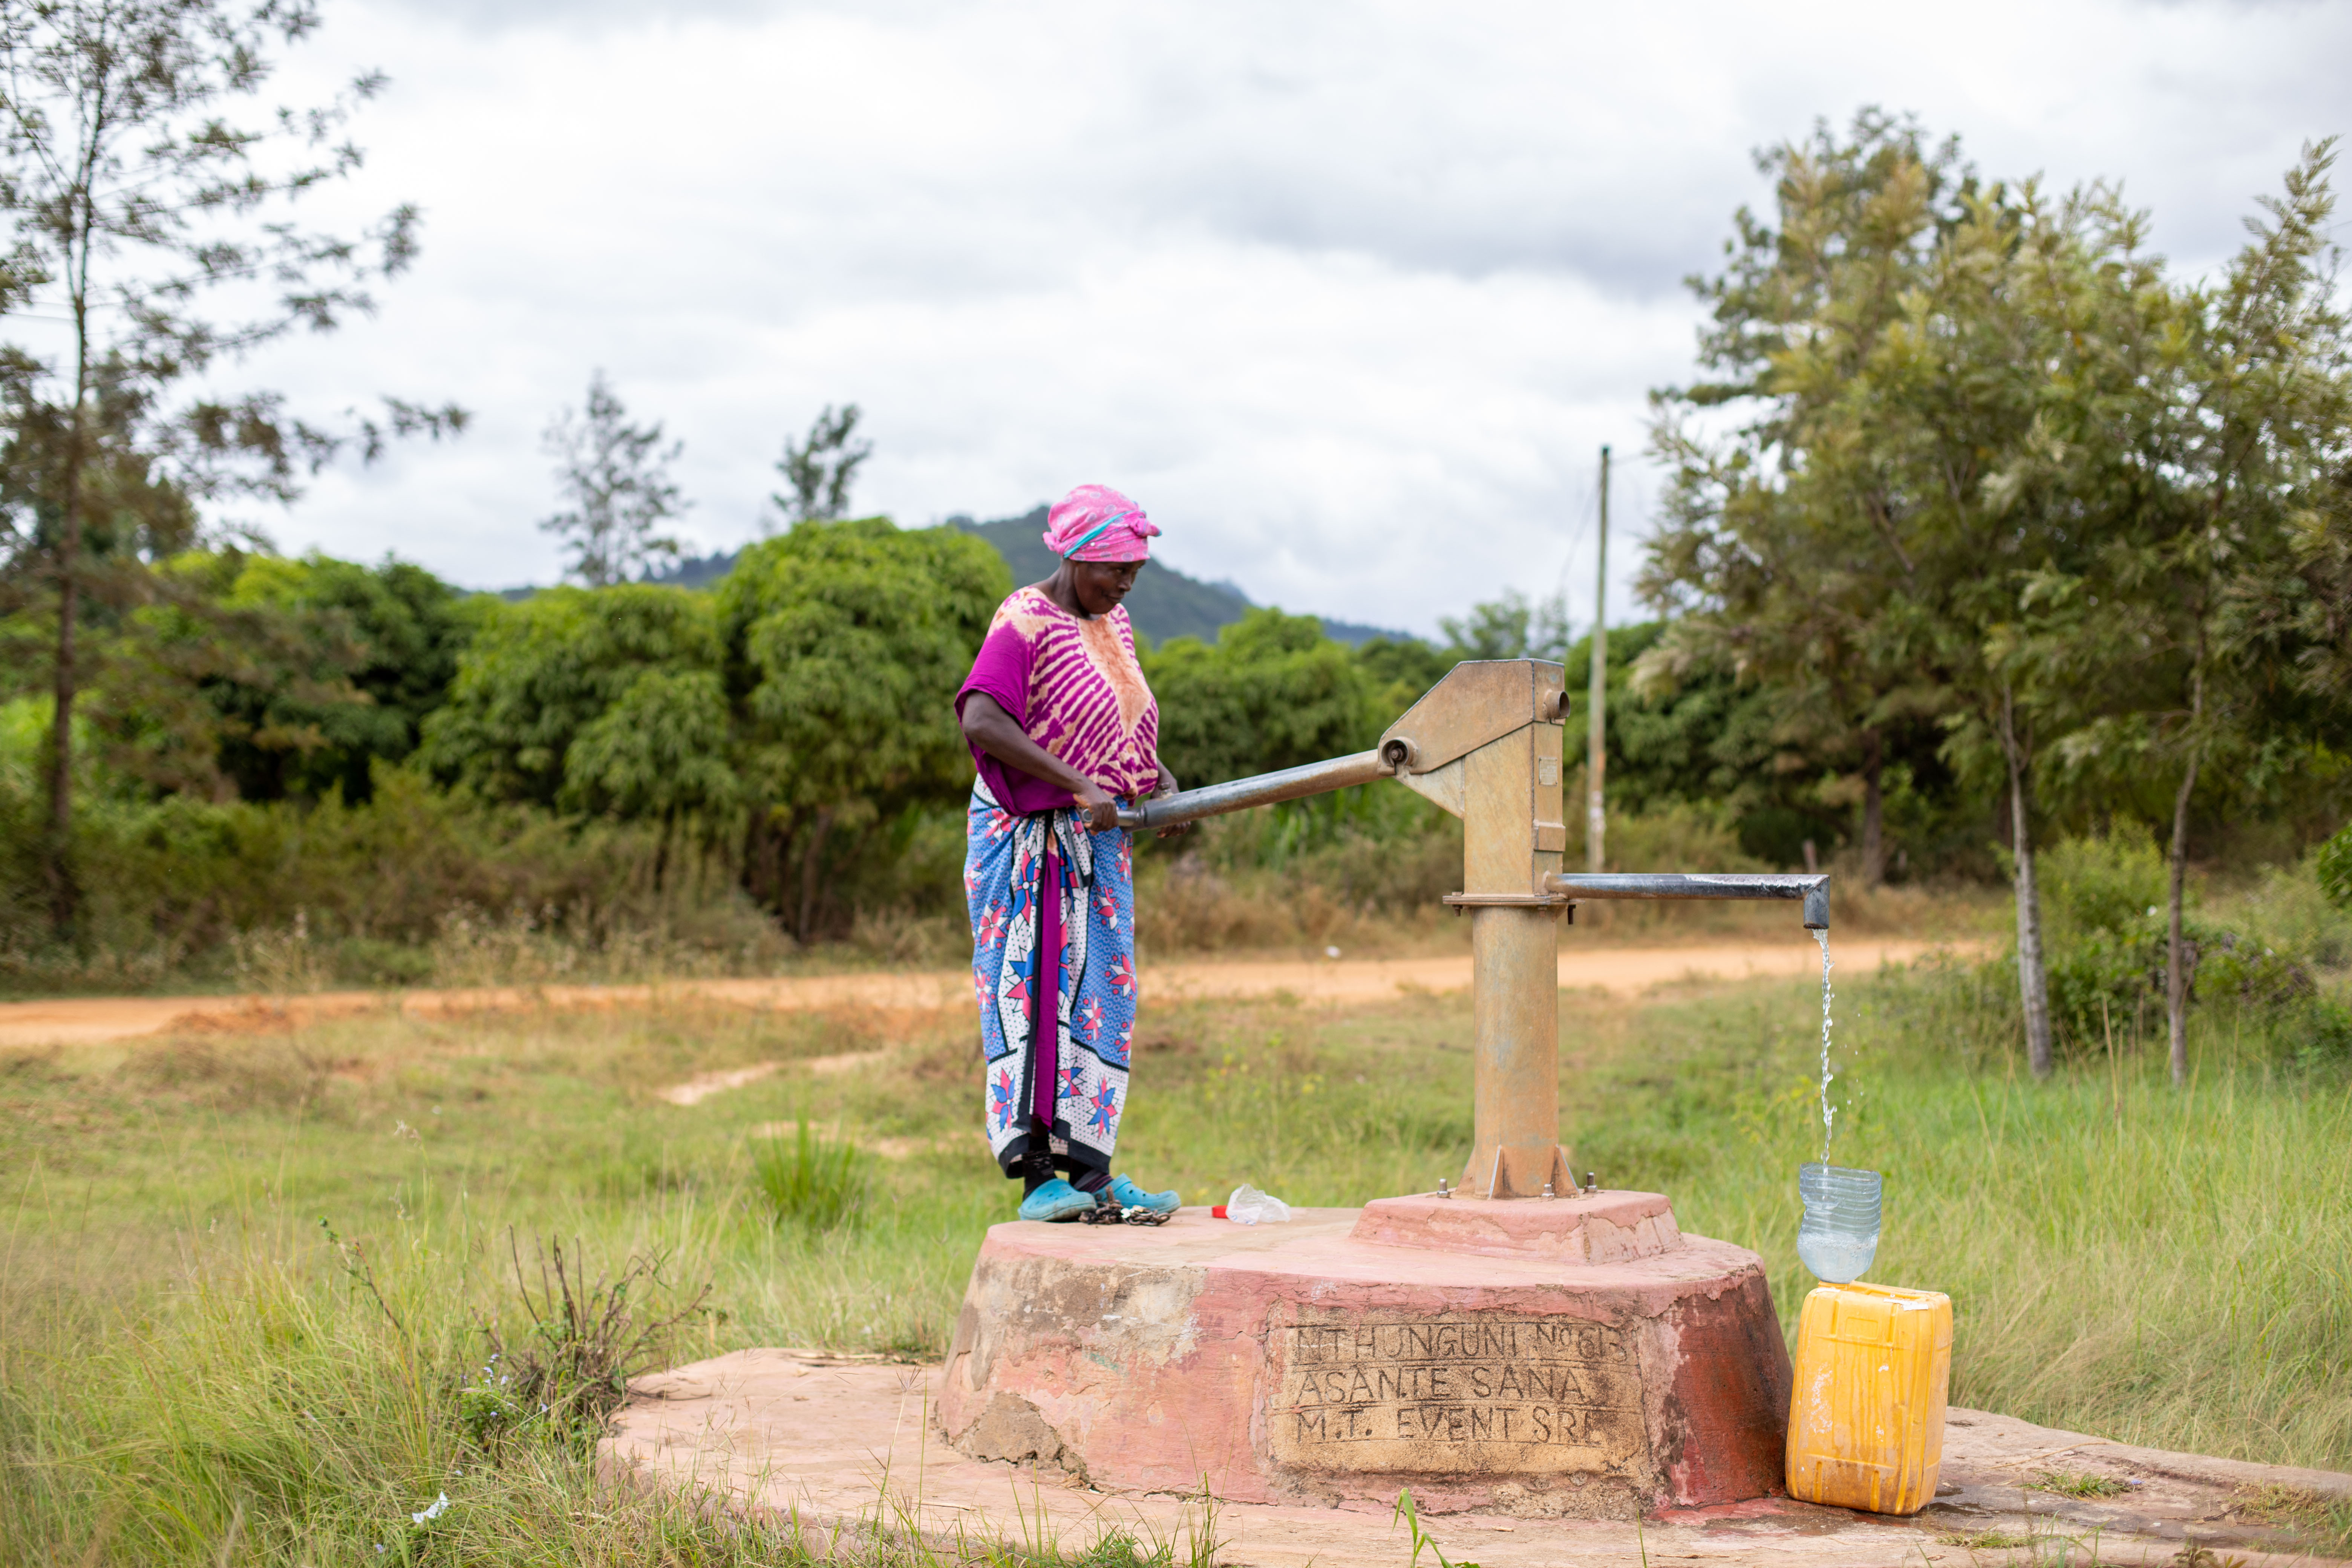 Restored landscapes ensure clean water security for the rural and urban communities